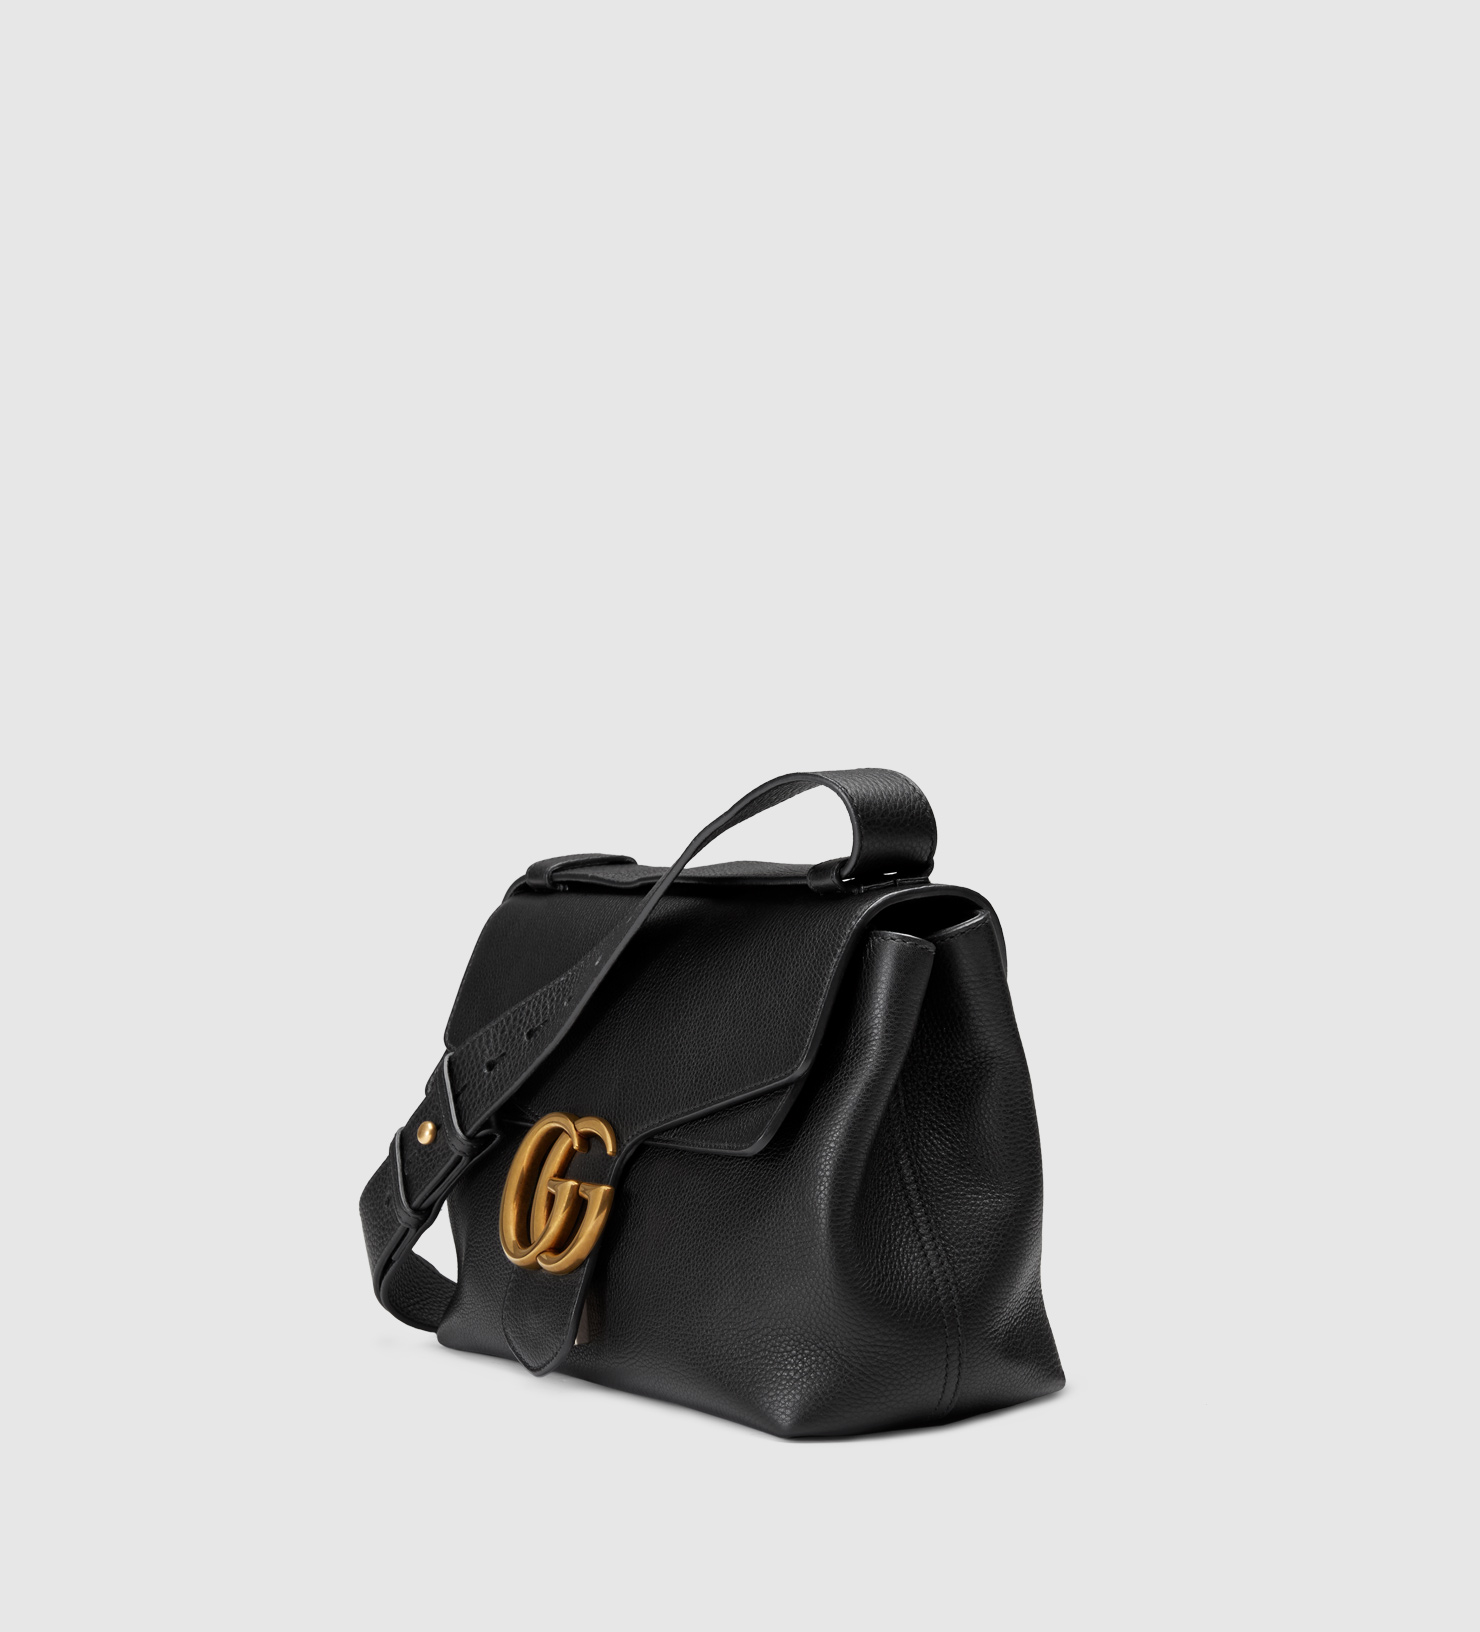 Gucci Gg Marmont Leather Shoulder Bag in Black | Lyst